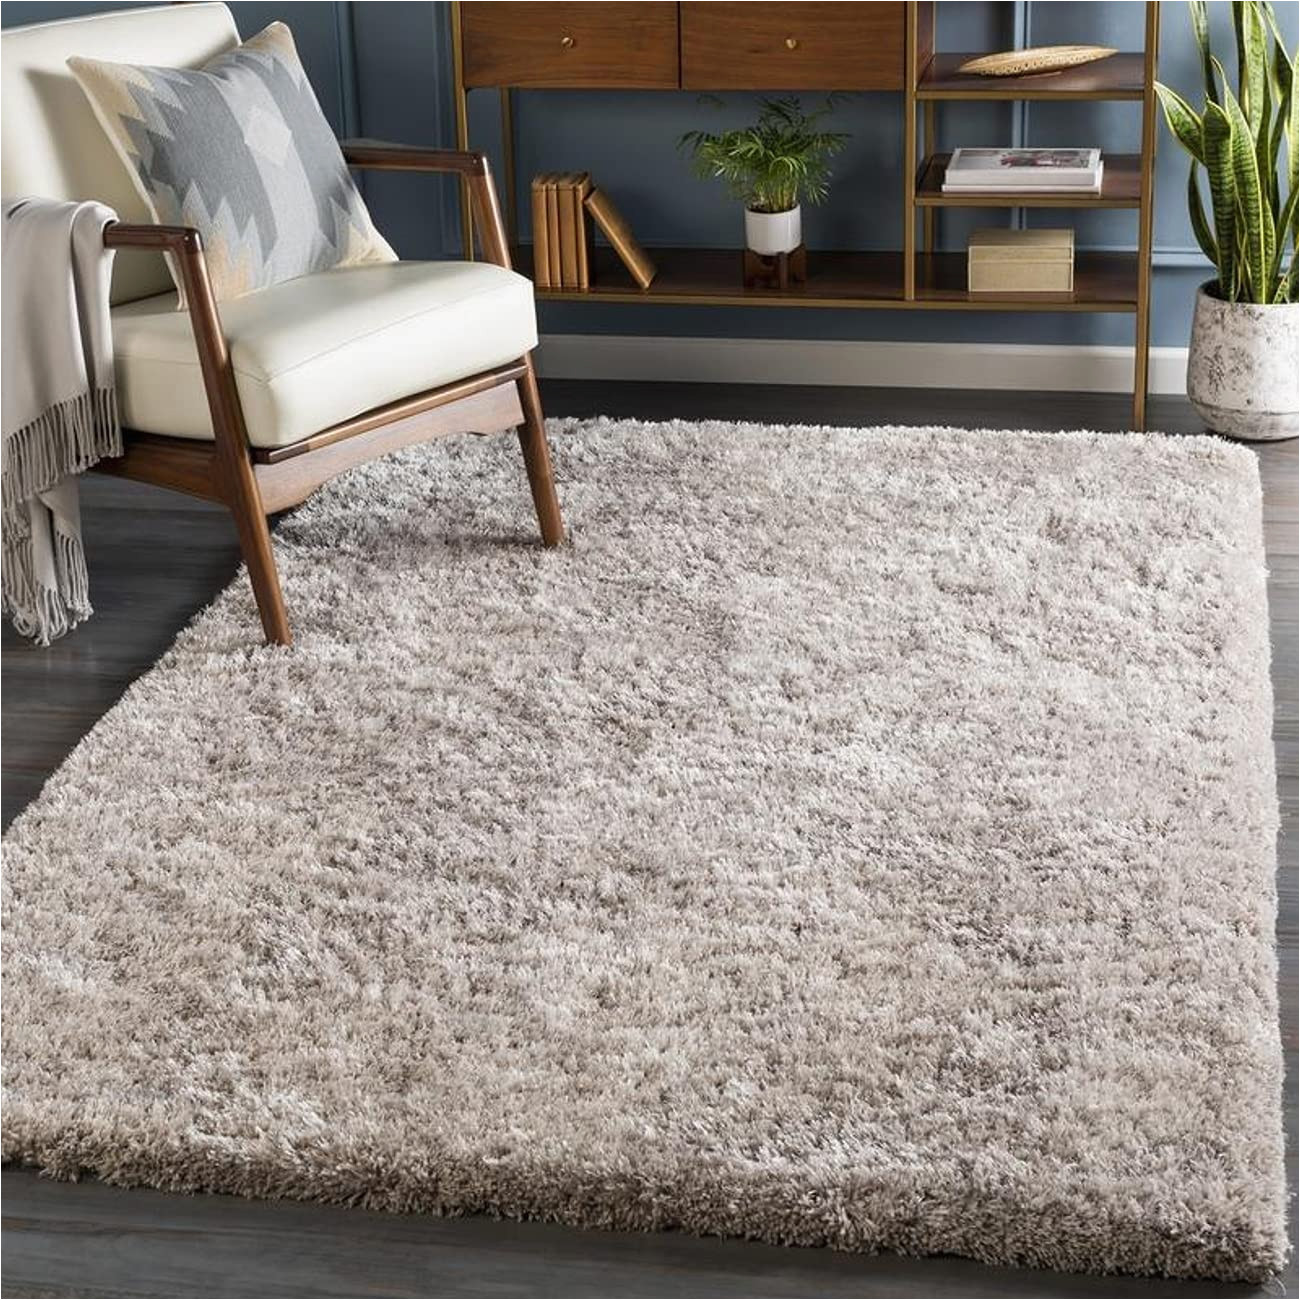 Amazon area Rugs 10 X 14 Mark&day area Rugs, 10×14 Cambrai Shag Light Gray area Rug, Gray / Beige / White Carpet for Living Room, Bedroom or Kitchen (10′ X 14′)